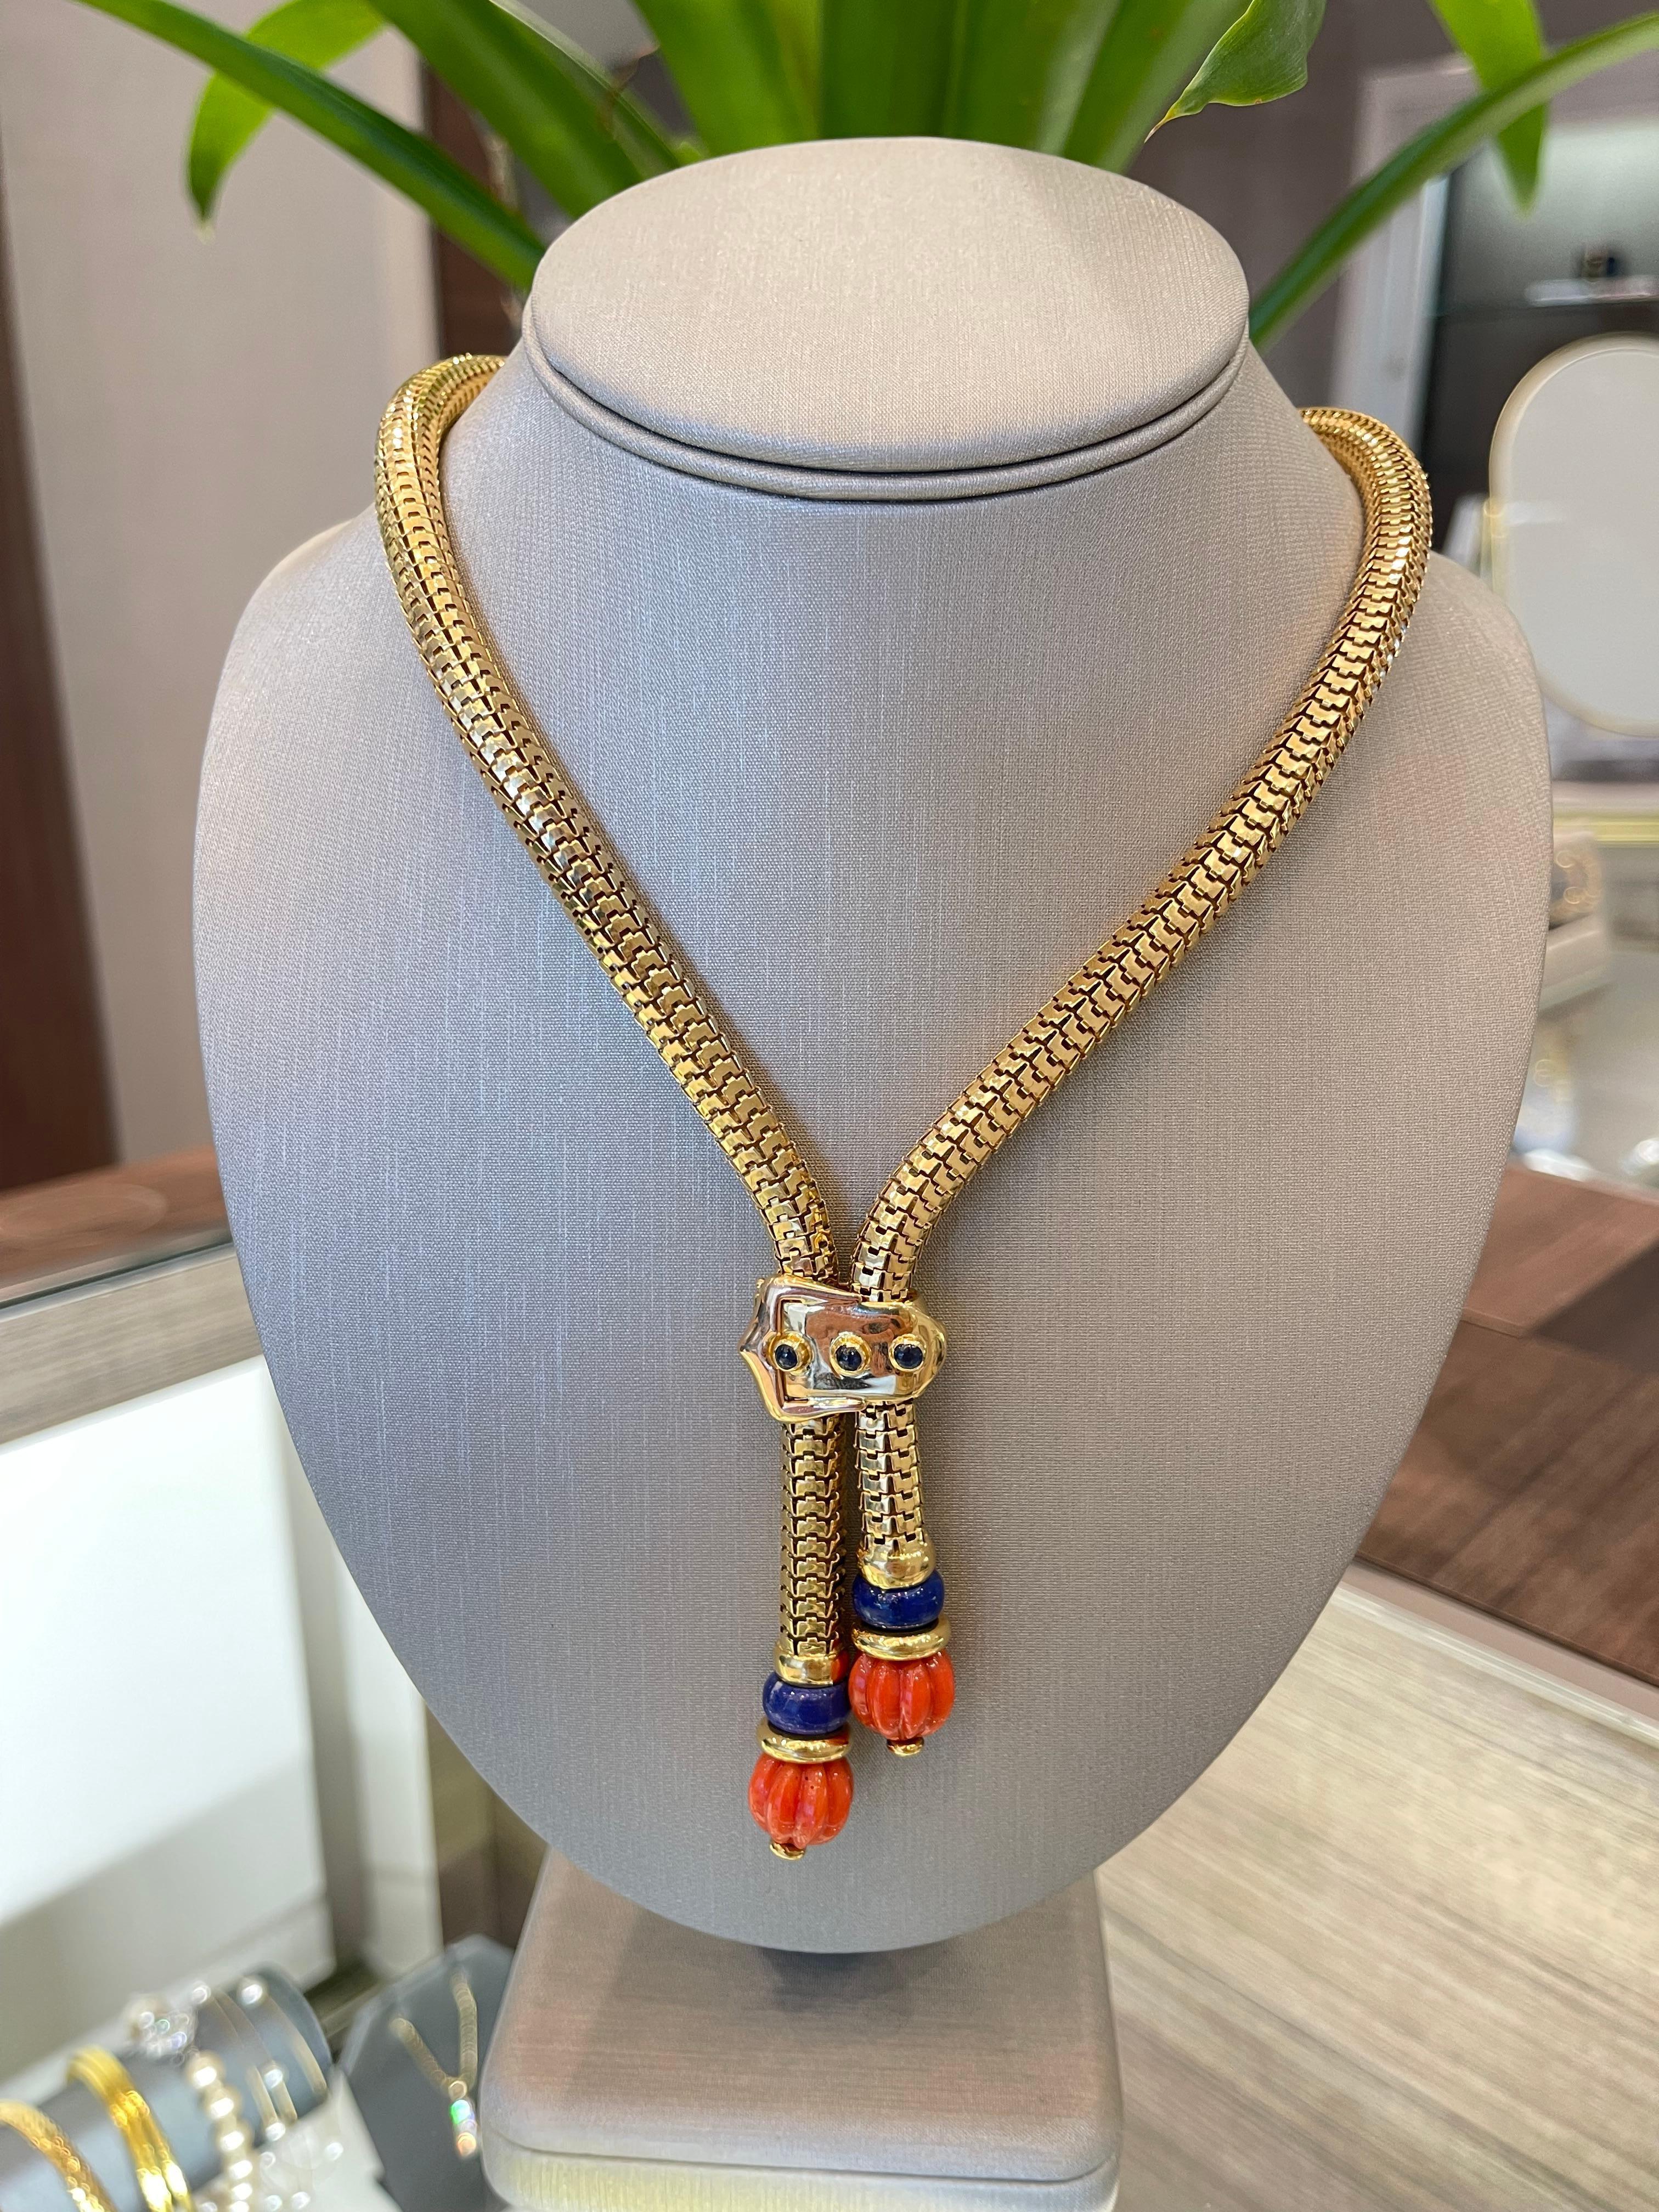 Coral & Lapis Lariat Necklace in 18K Yellow Gold. The necklace features two carved coral beads and lapis lazuli. The necklace fits like an 18